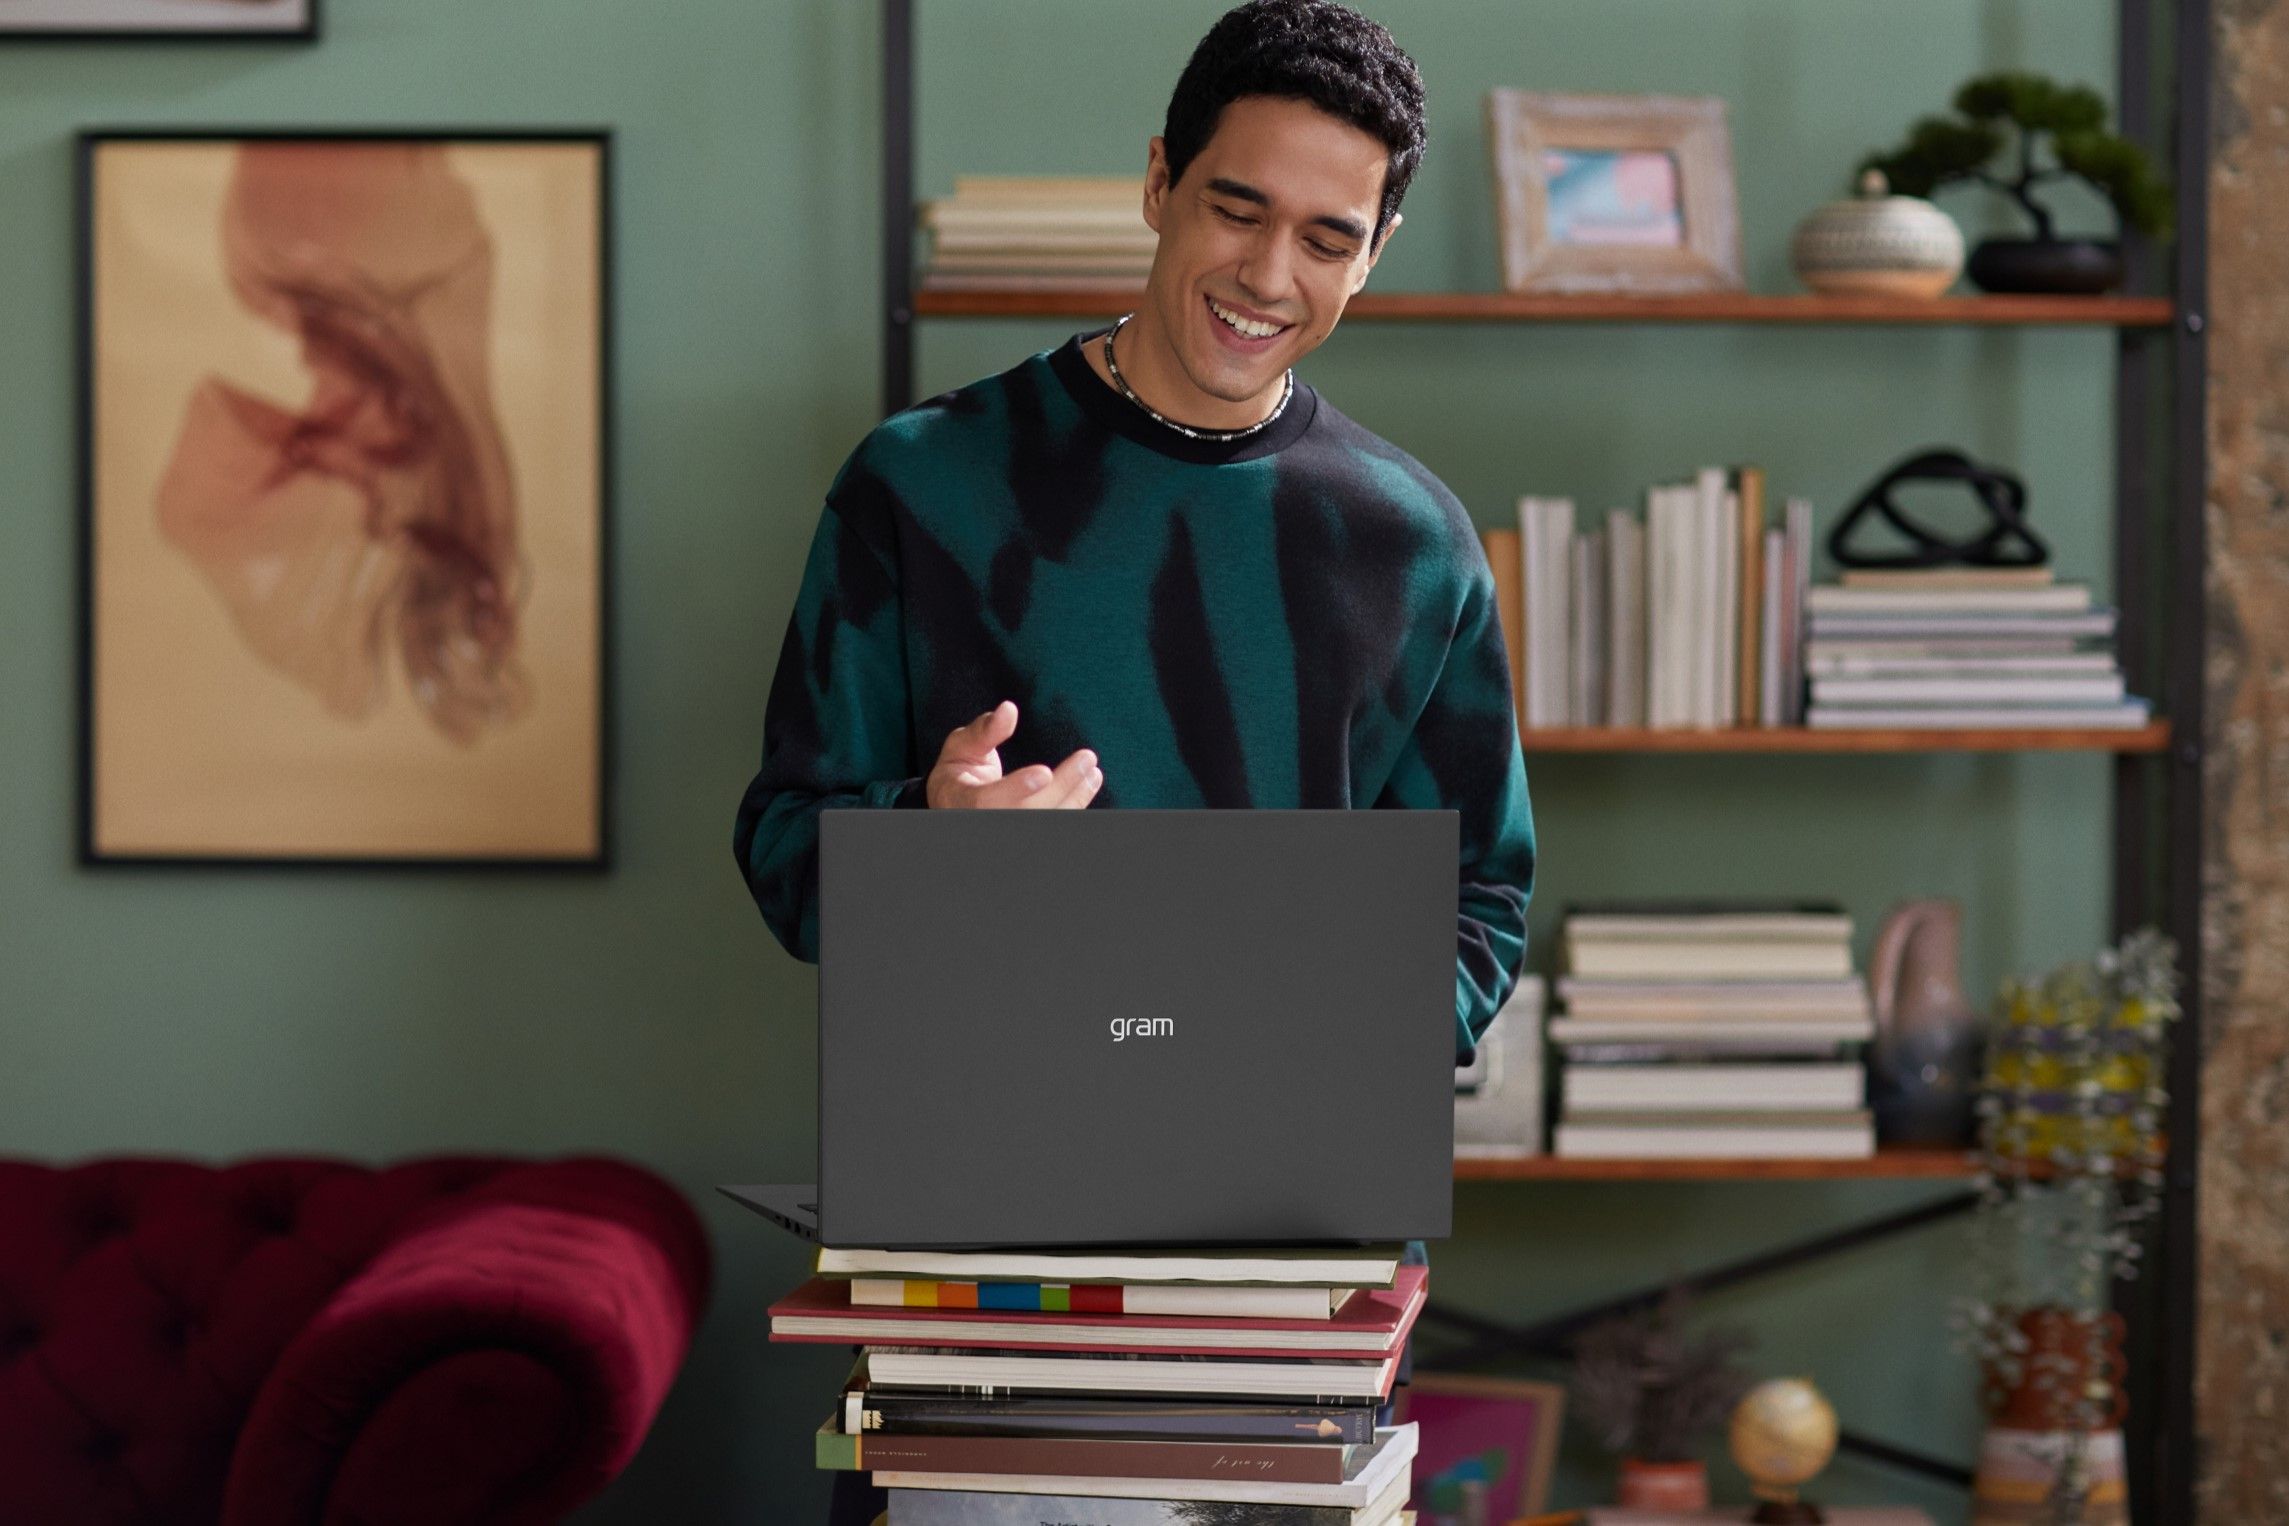 An LG gram laptop sitting on a pile of books, facing away from the camera. A man is standing in front of the laptop and smiling.